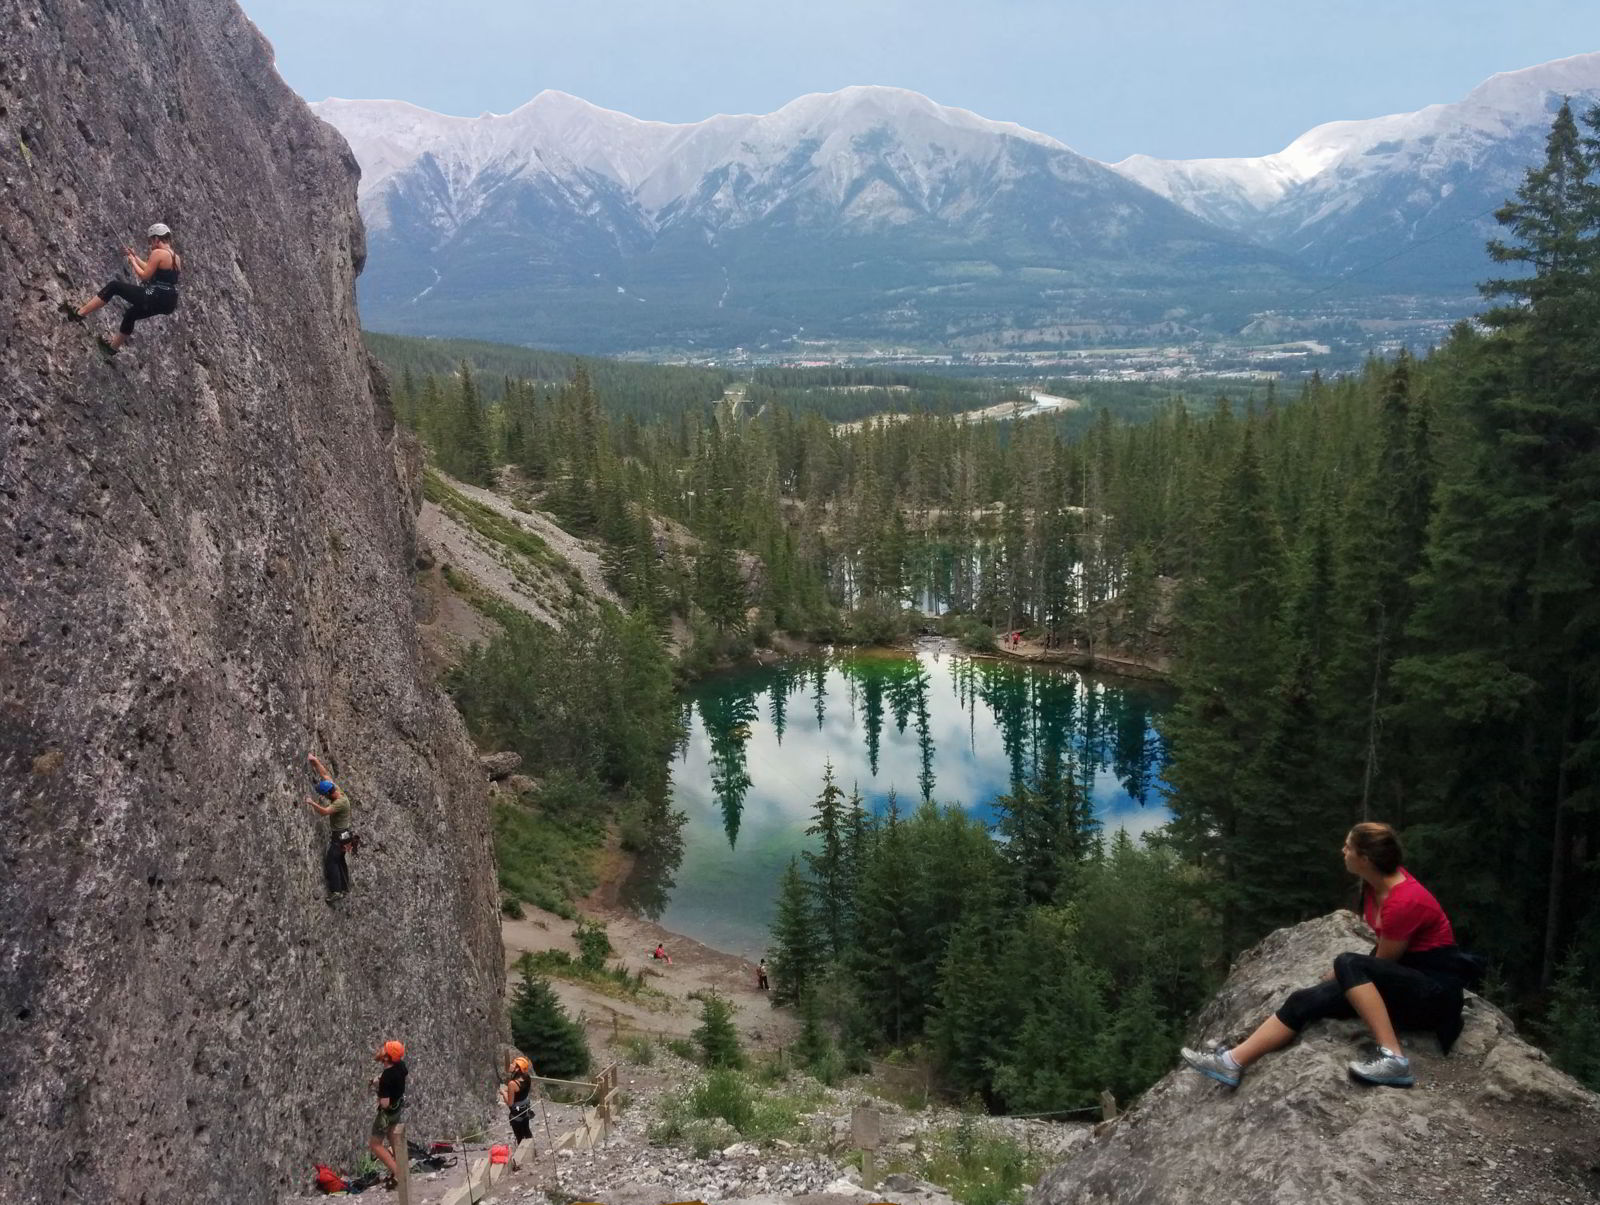 An image of a young woman watching rock climbers scaling a cliff above the Grassi Lakes in Canmore, Alberta - Grassi Lakes hike.